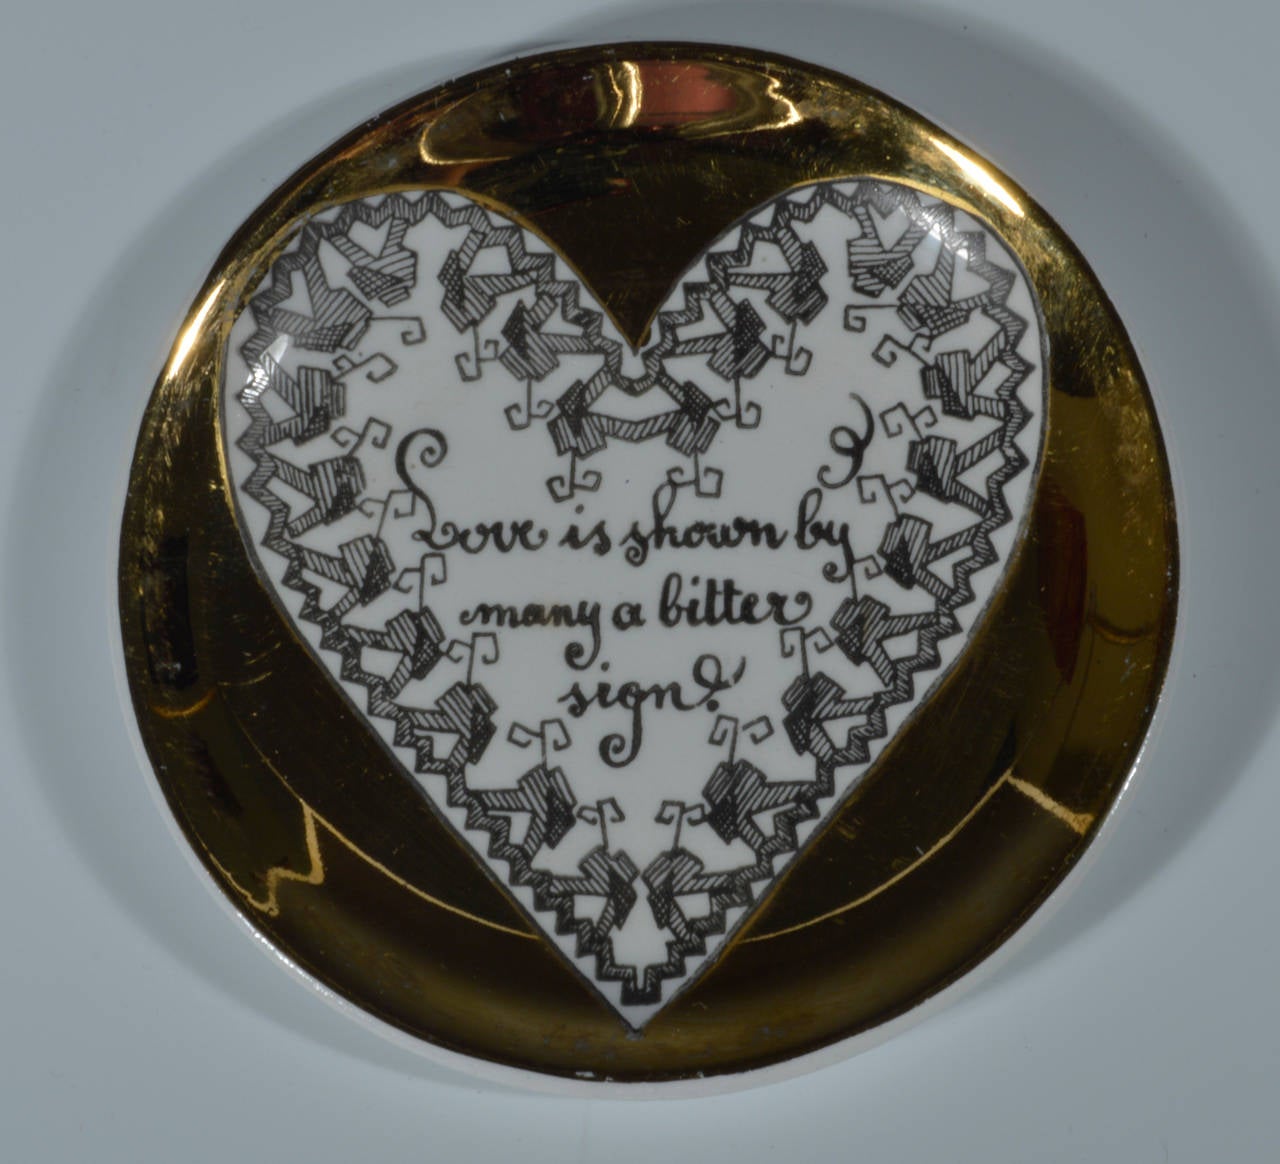 Piero Fornasetti Porcelain Boxed Coaster Set with Love, Hearts and ...